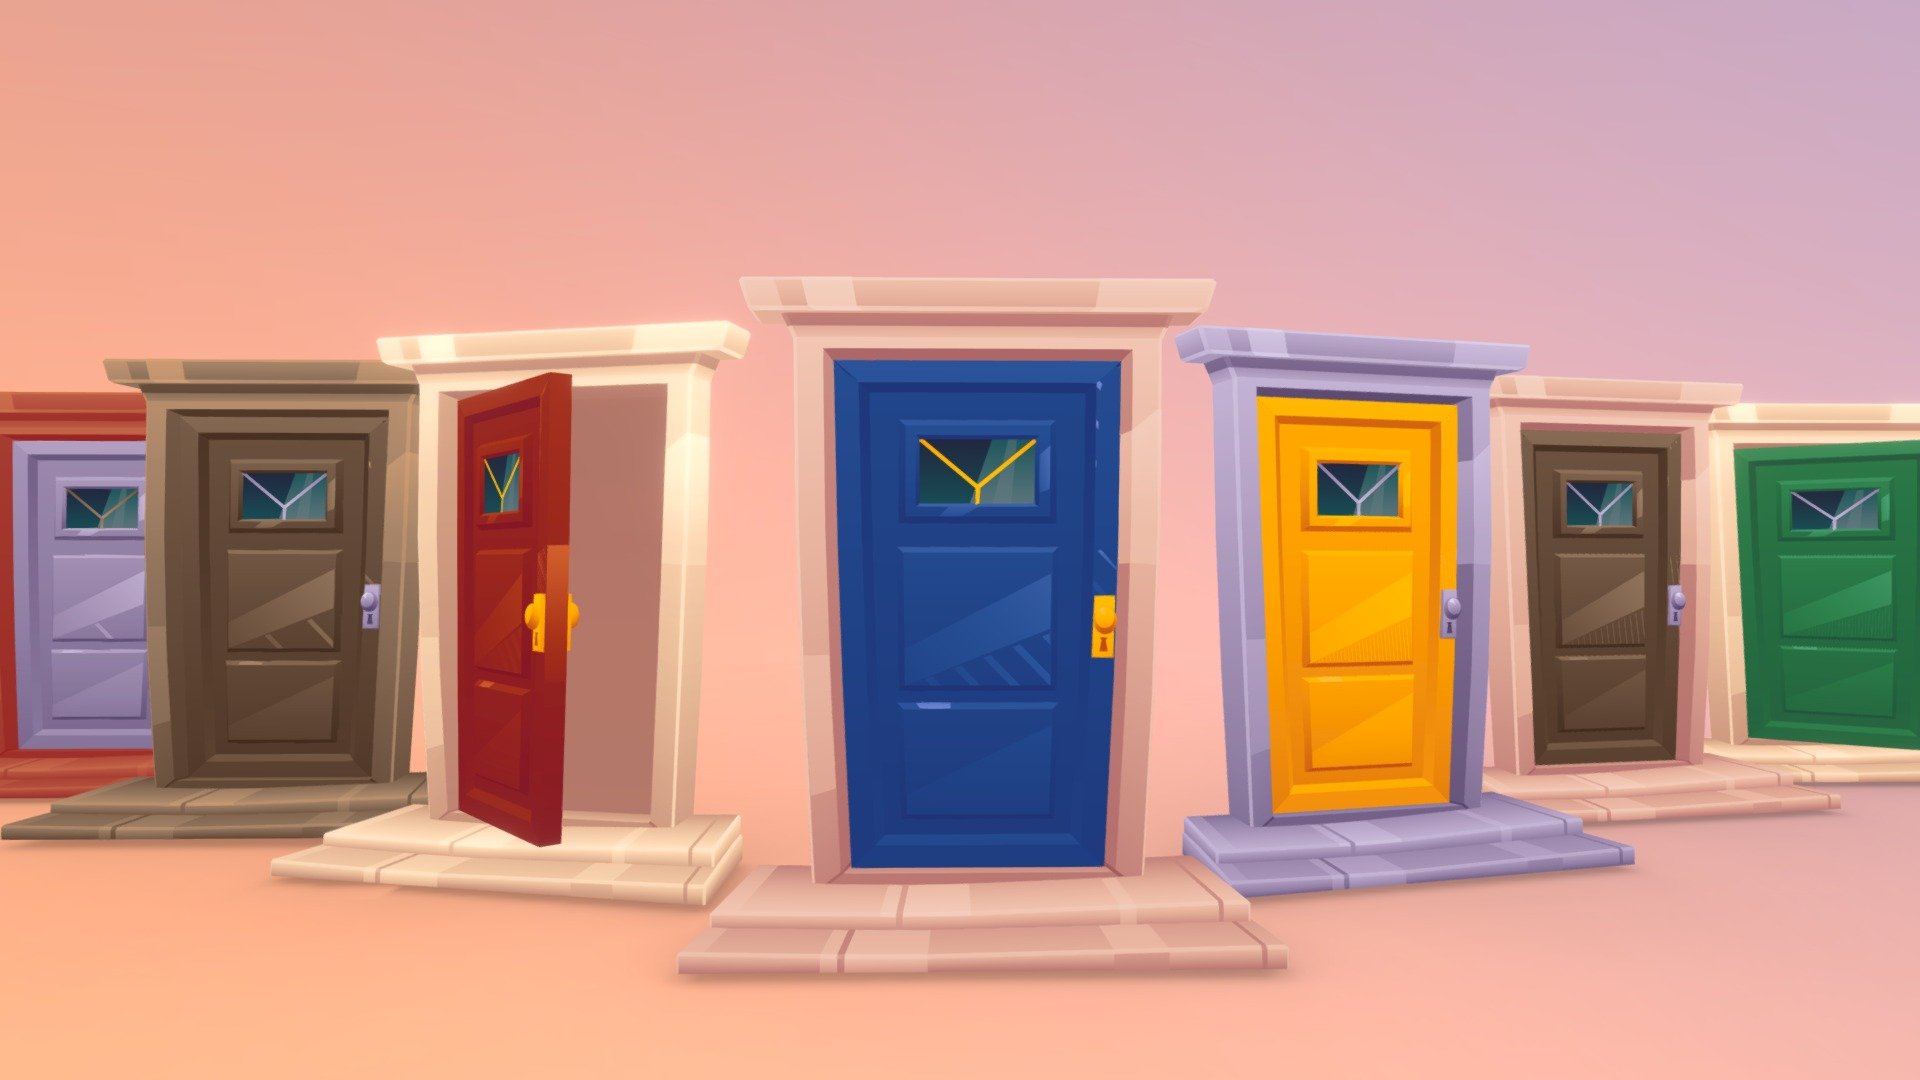 stylized cartoon doors pack 

Textured with gradient atlas, so it is performant for mobile games and video games.

Like a few of my other assets in the same style, it uses a single texture diffuse map and is mapped using only color gradients. 
All gradient textures can be extended and combined to a large atlas.

There are more assets in this style to add to your game scene or environment. Check out my sale.

If you want to change the colors of the assets, you just need to move the UVs on the atlas to a different gradient.
Or contact me for changes, for a small fee.

*-------------Terms of Use--------------

Commercial use of the assets  provided is permitted but cannot be included in an asset pack or sold at any sort of asset/resource marketplace.*

9213140

5207418 - Stylized Doors - Buy Royalty Free 3D model by Stylized Box (@Stylized_Box) 3d model